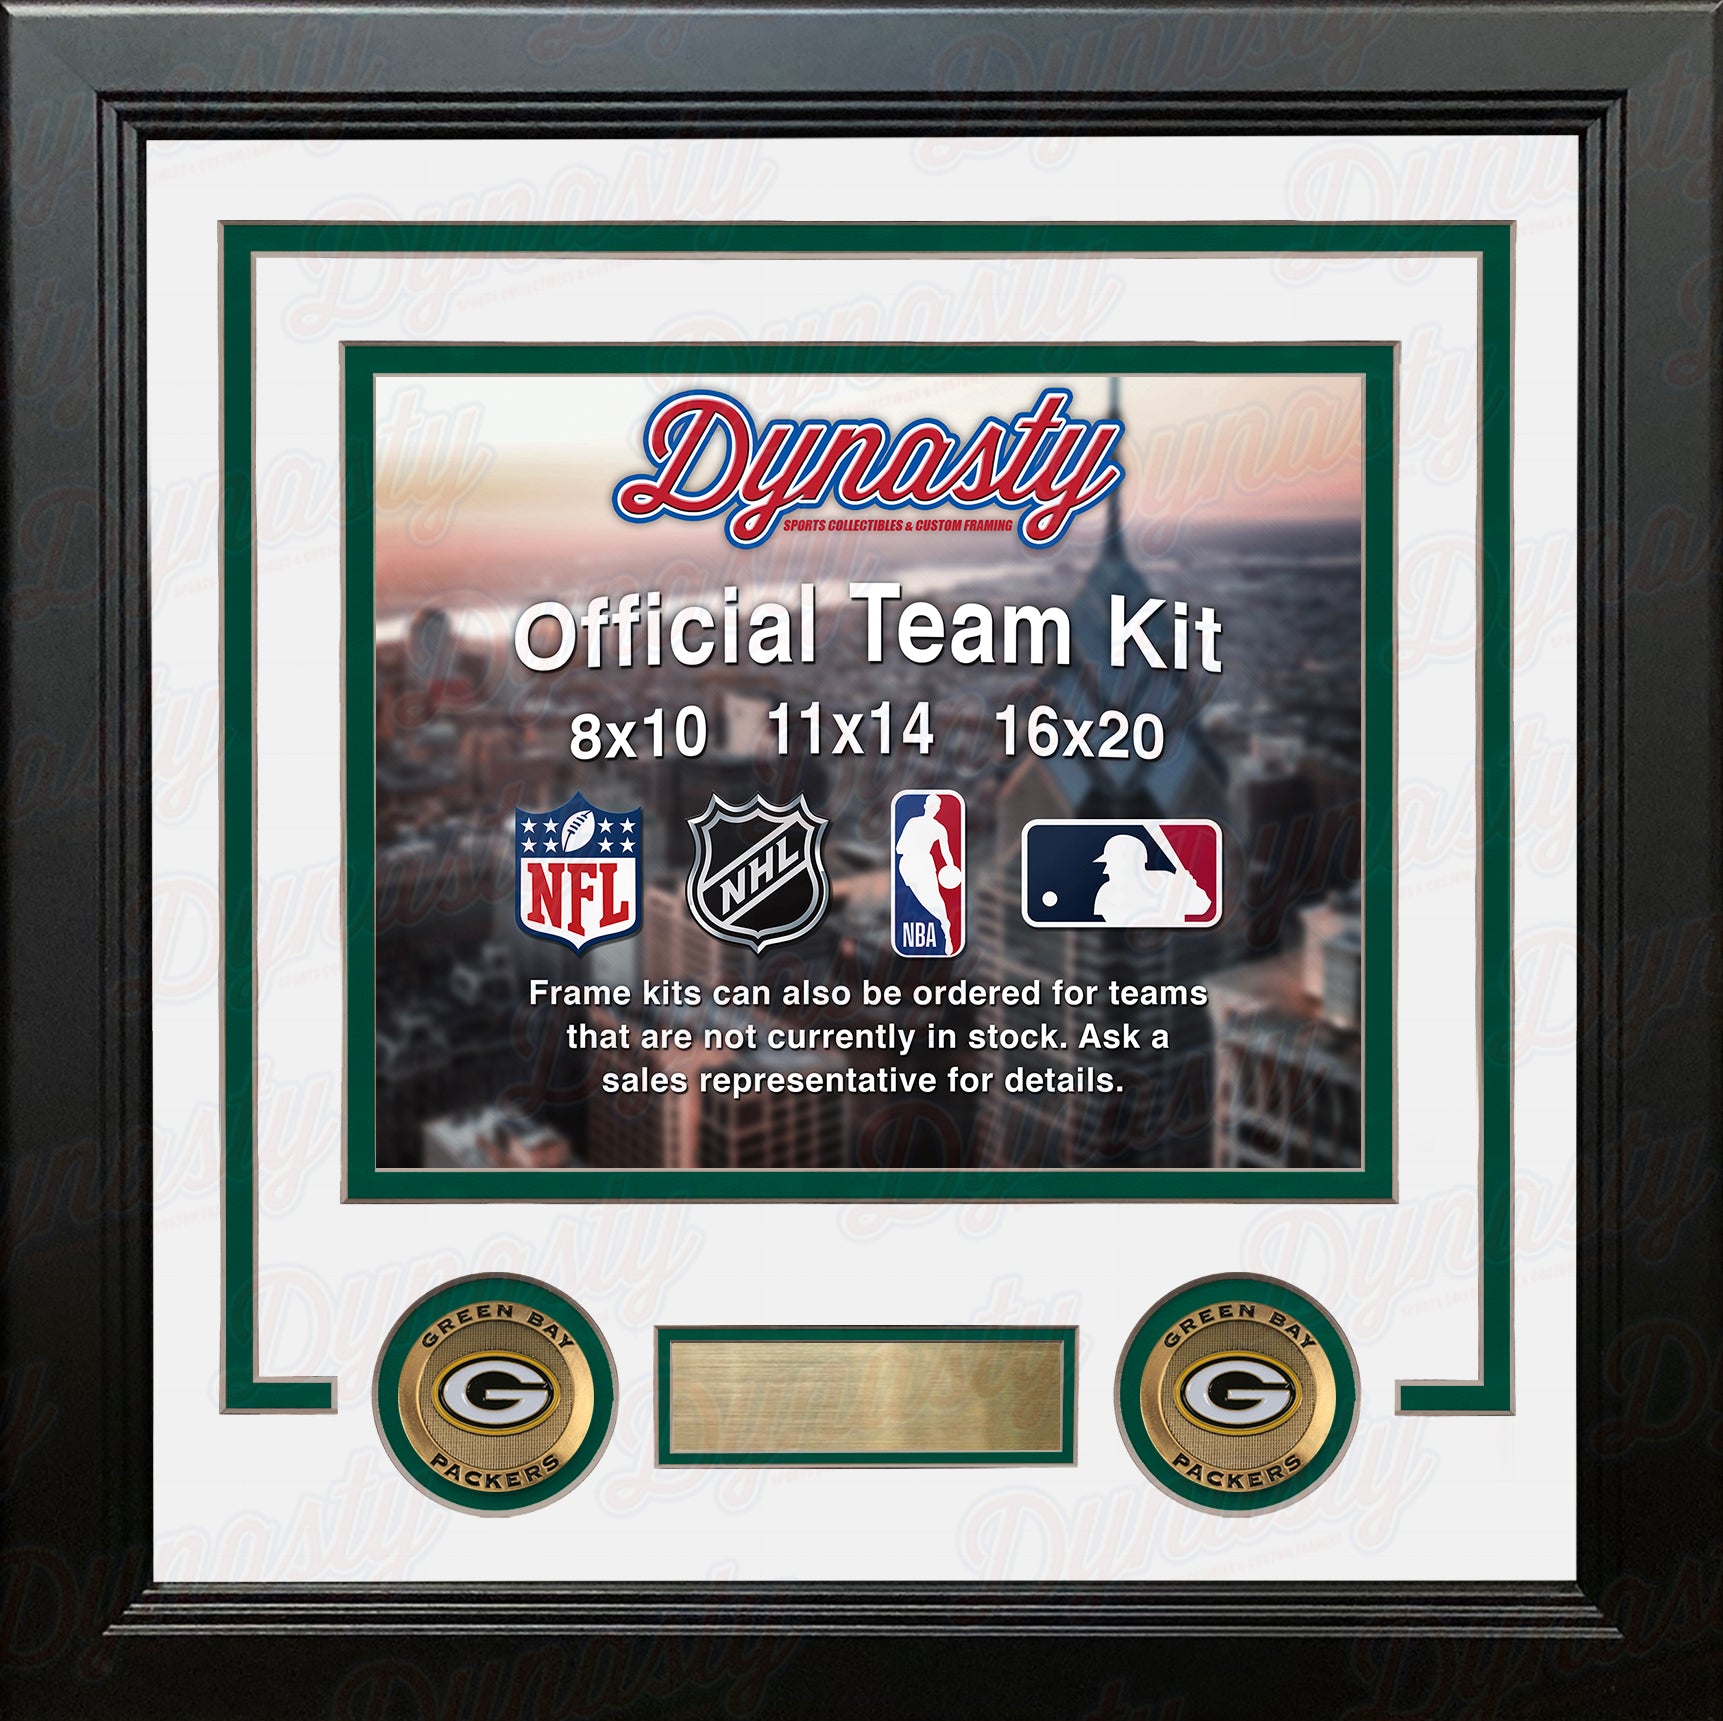 NFL Football Photo Picture Frame Kit - Green Bay Packers (White Matting, Green Trim) - Dynasty Sports & Framing 